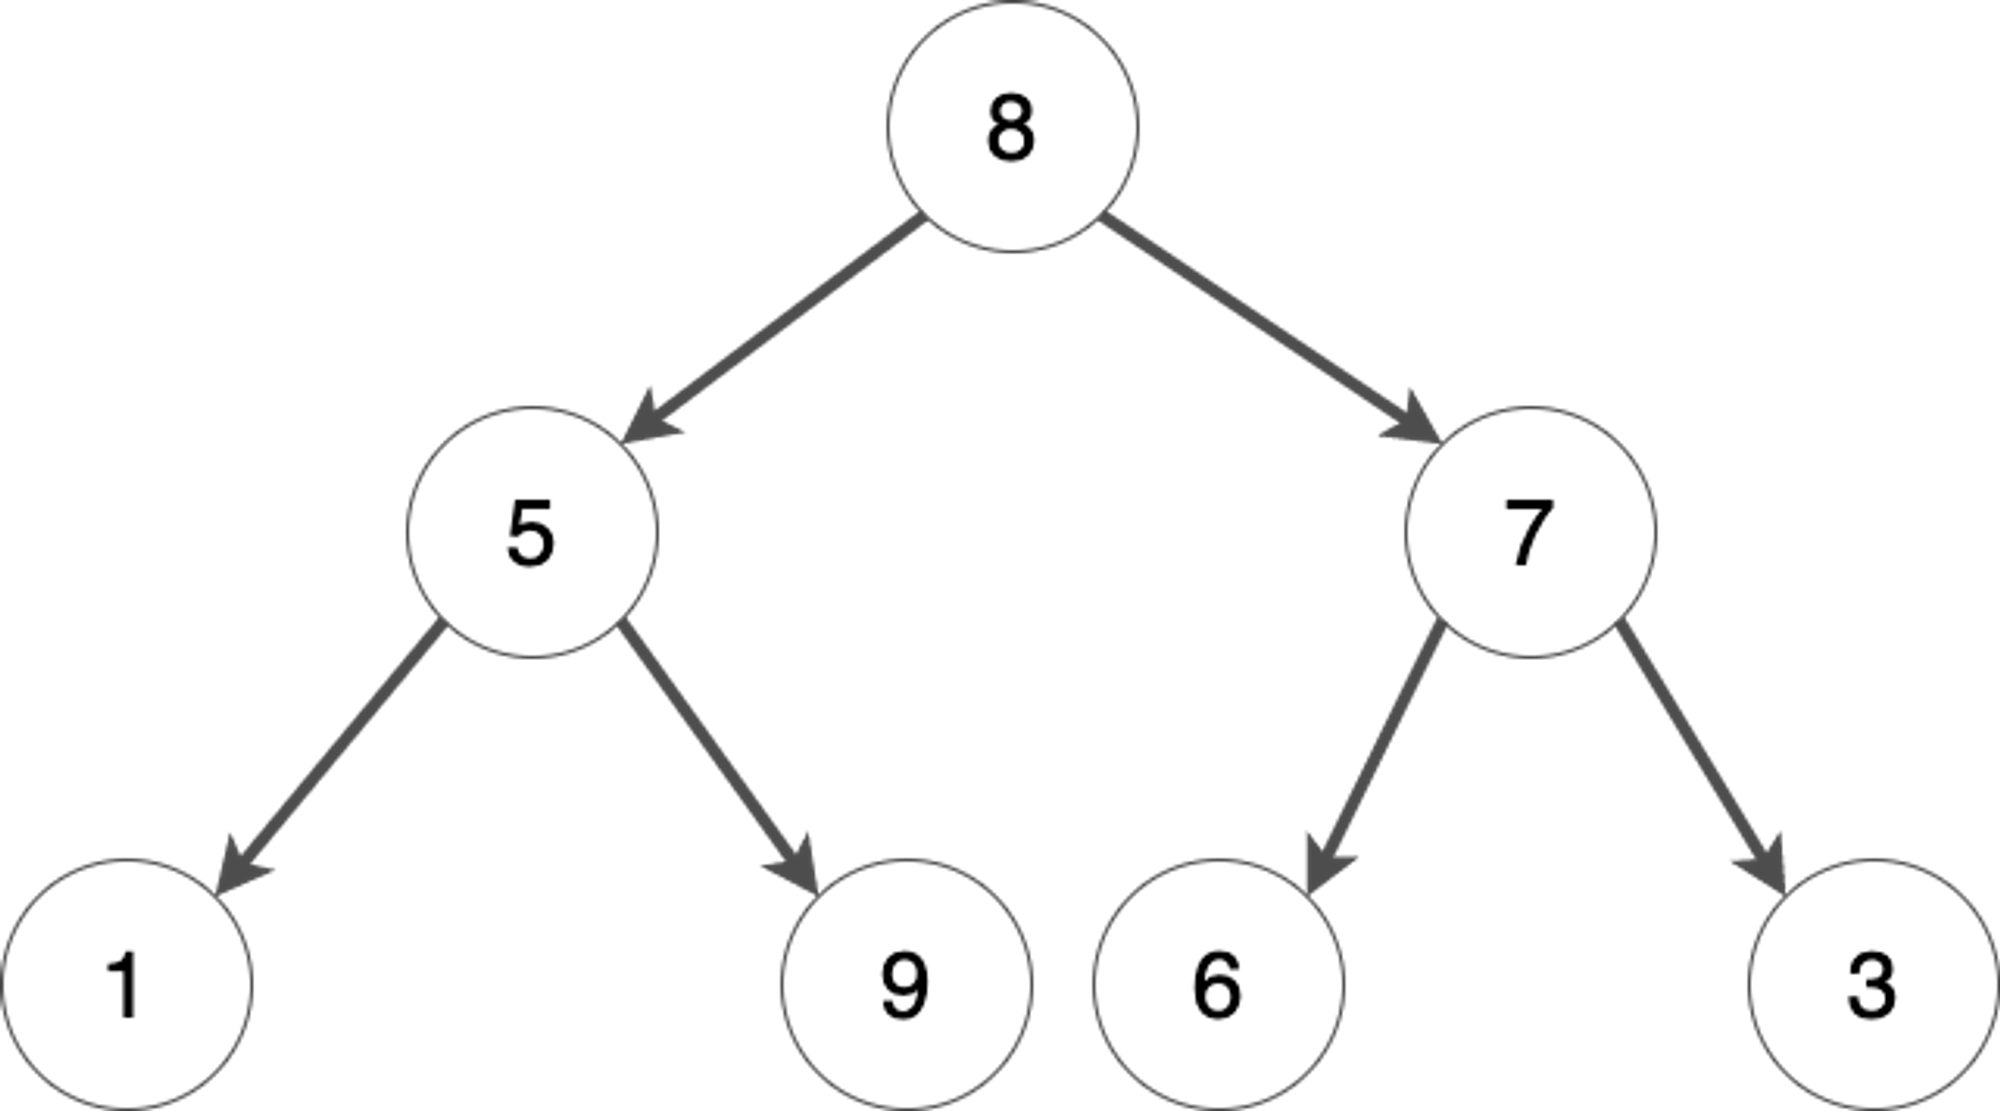 The node with a value of 9 is larger than its parent node. Therefore, the heap property is not satisfied.